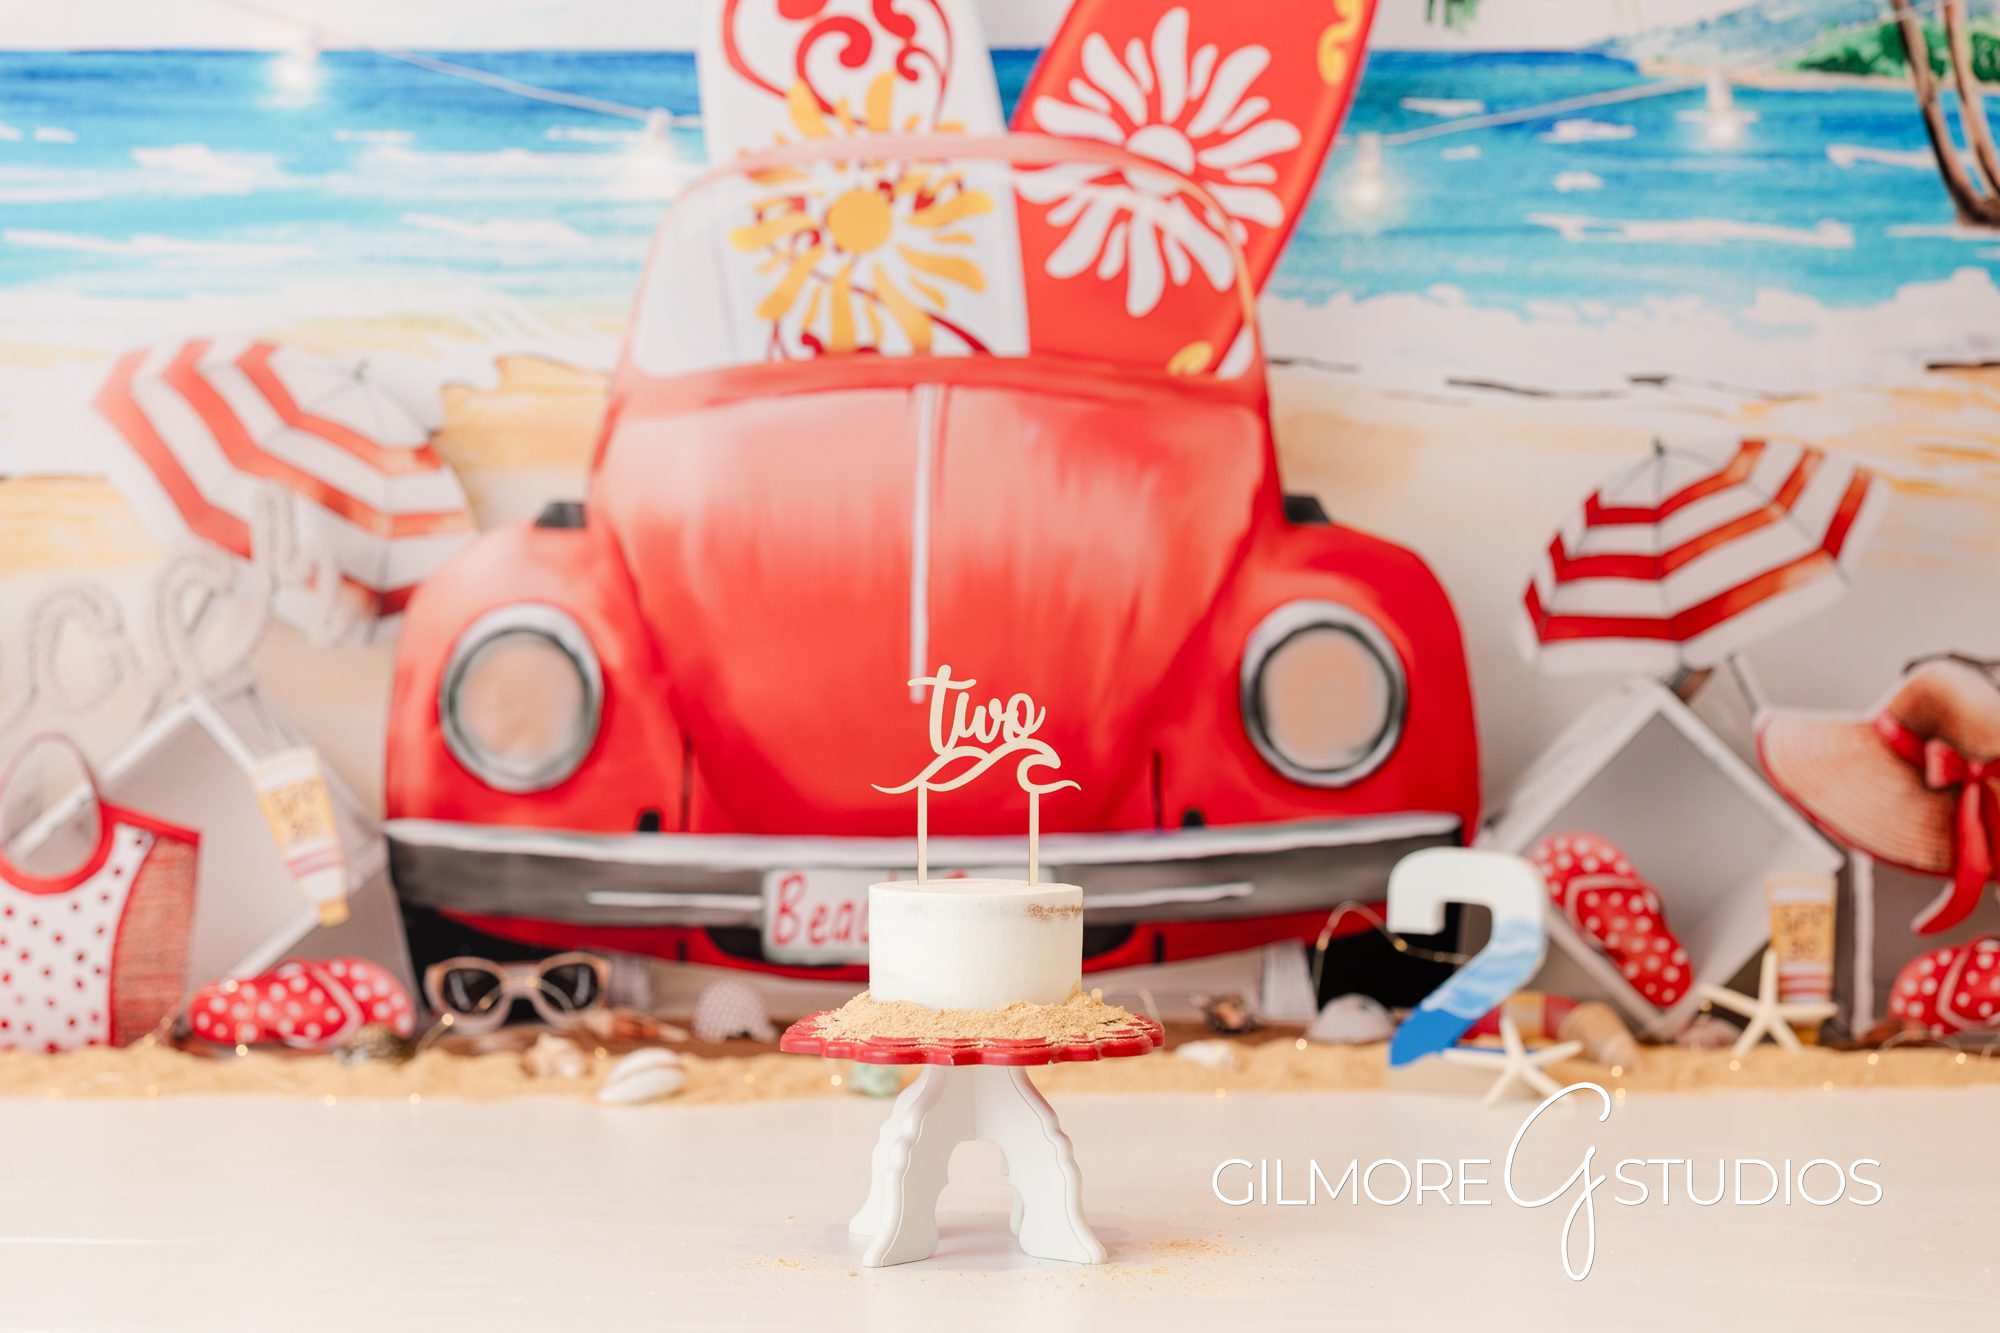 Summer Cake Smash VW Bug Beetle Newport Beach, beach, yellow polka dot bikini, gilmore studios, cake smash, little girl 2nd birthday, happy bday, child photography, vw beetle, vw bug, volkswagon, red and white, beach, waves, sand, white cake, vanilla frosting, buttercream, excited, ponytail, white romper, surfboards, yellow and red